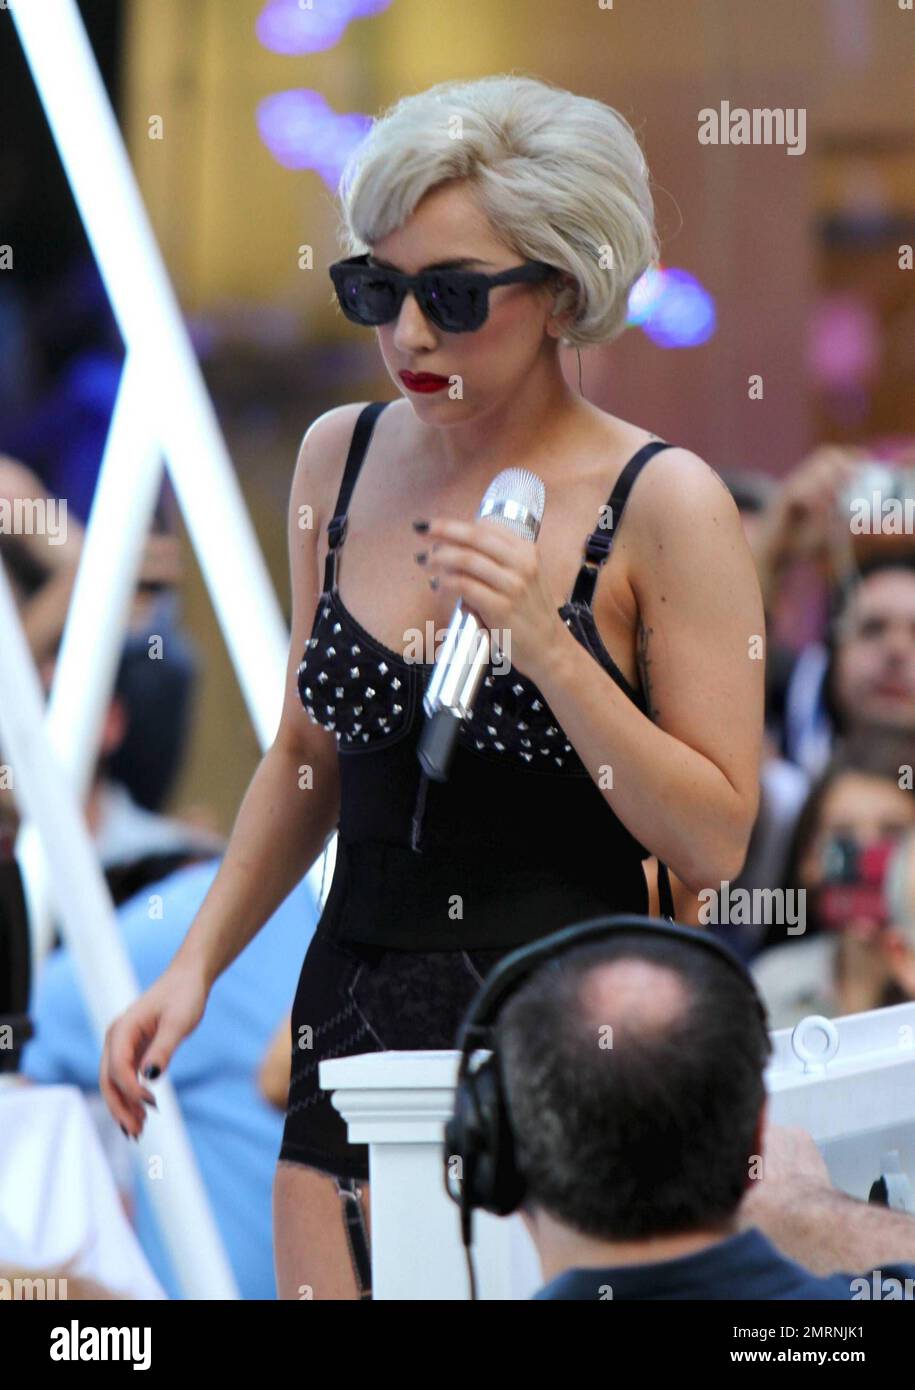 As the sweltering summer heat continues in New York, Lady Gaga